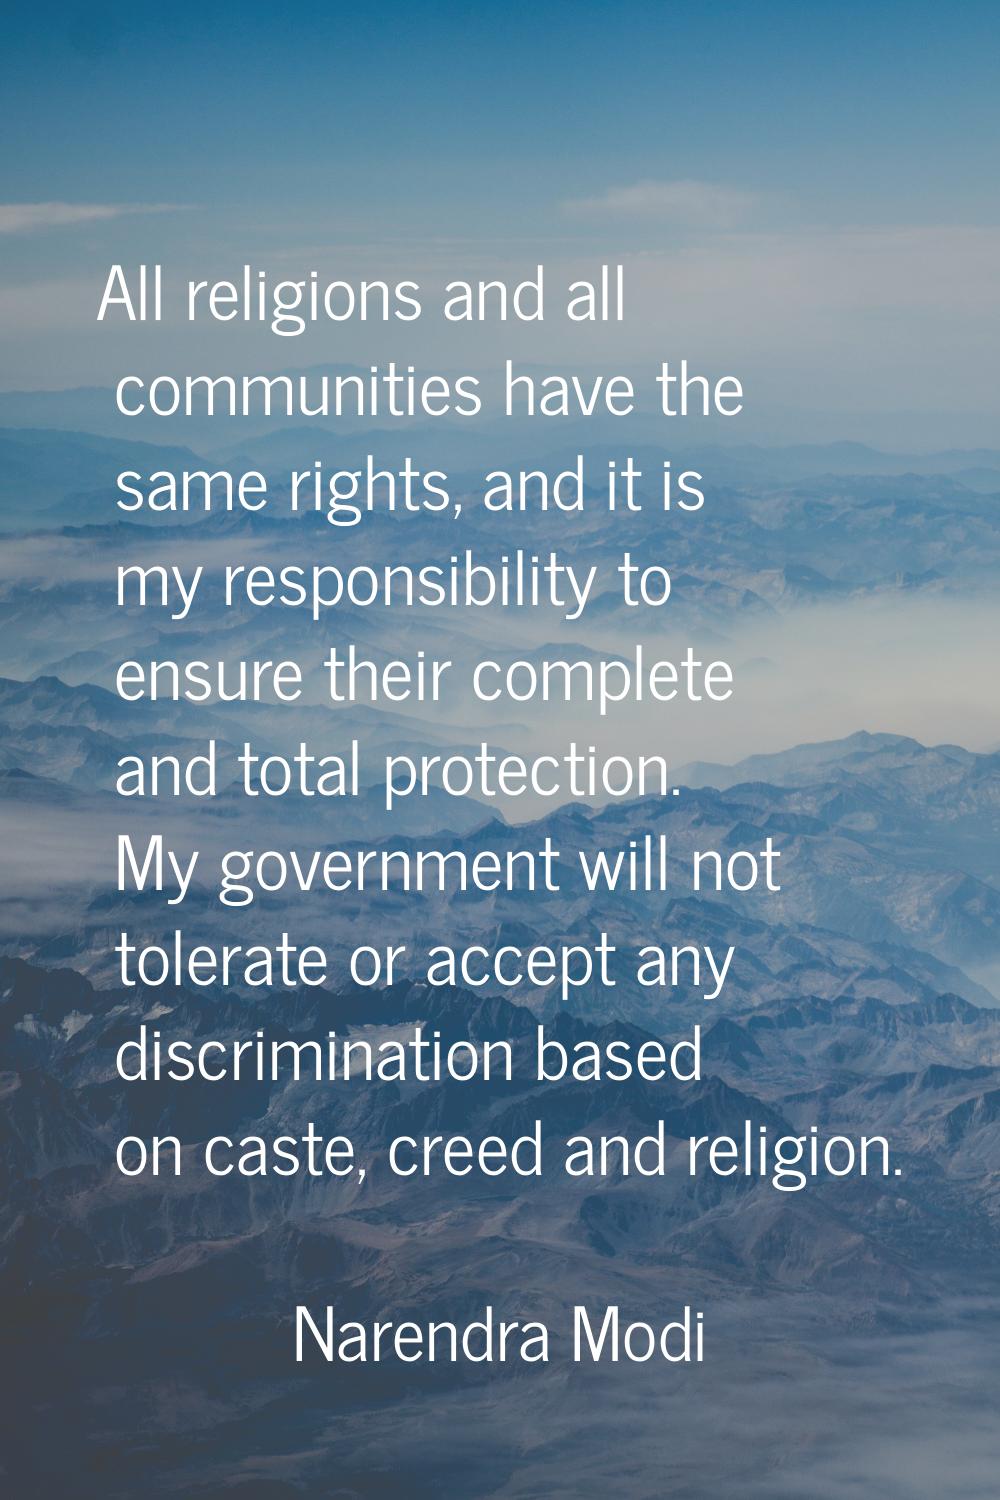 All religions and all communities have the same rights, and it is my responsibility to ensure their